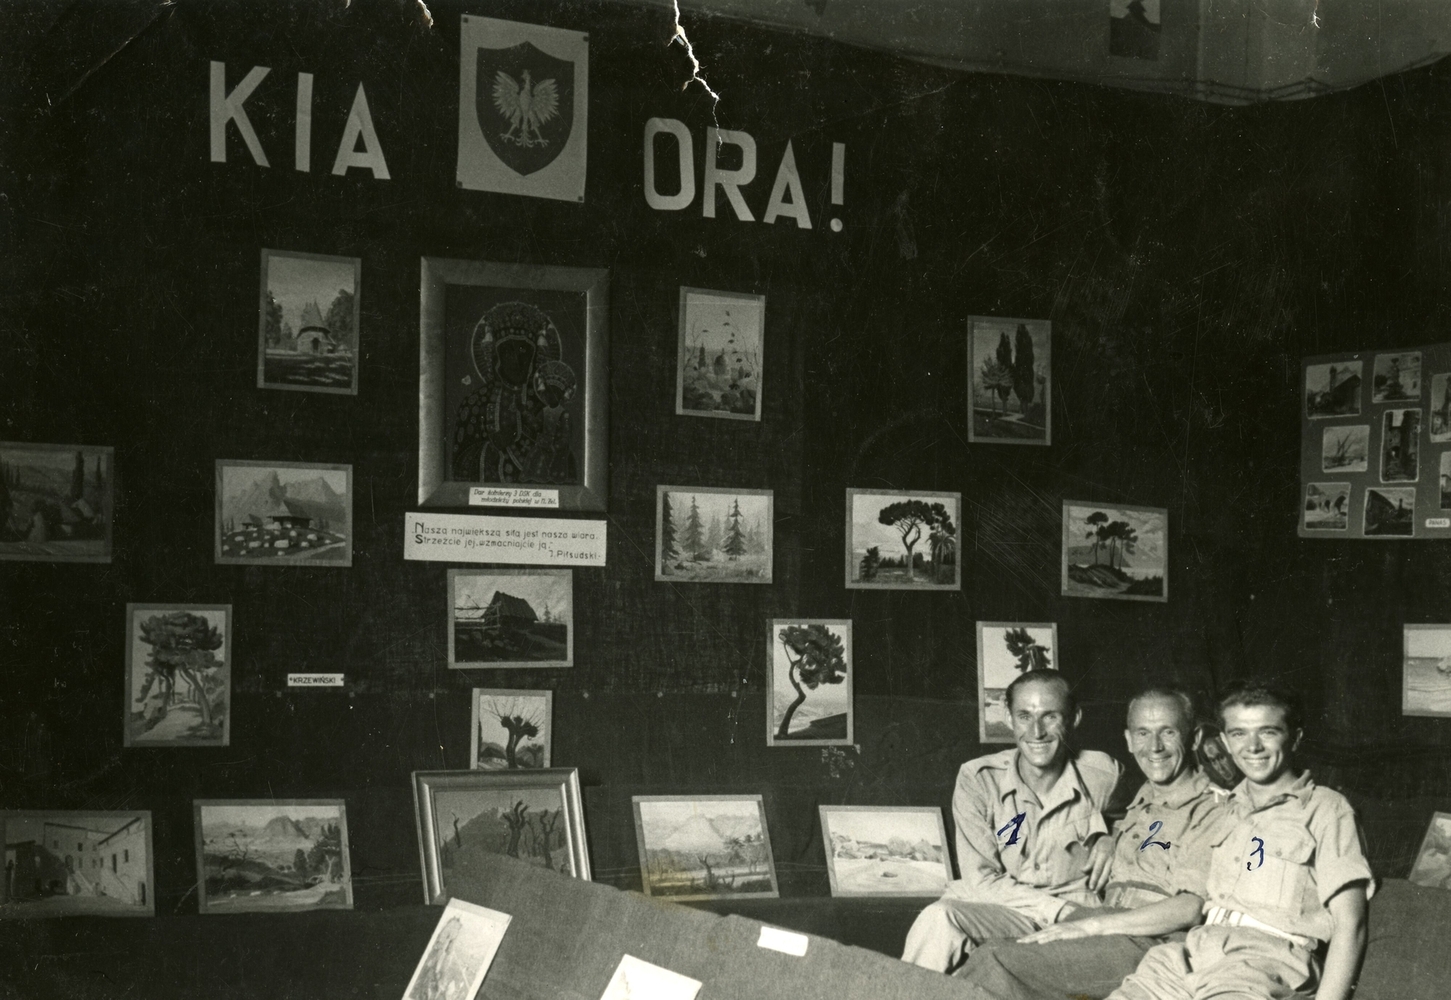 The three soldiers, in khaki, smiling at the camera in the right foreground, surrounded by paintings.